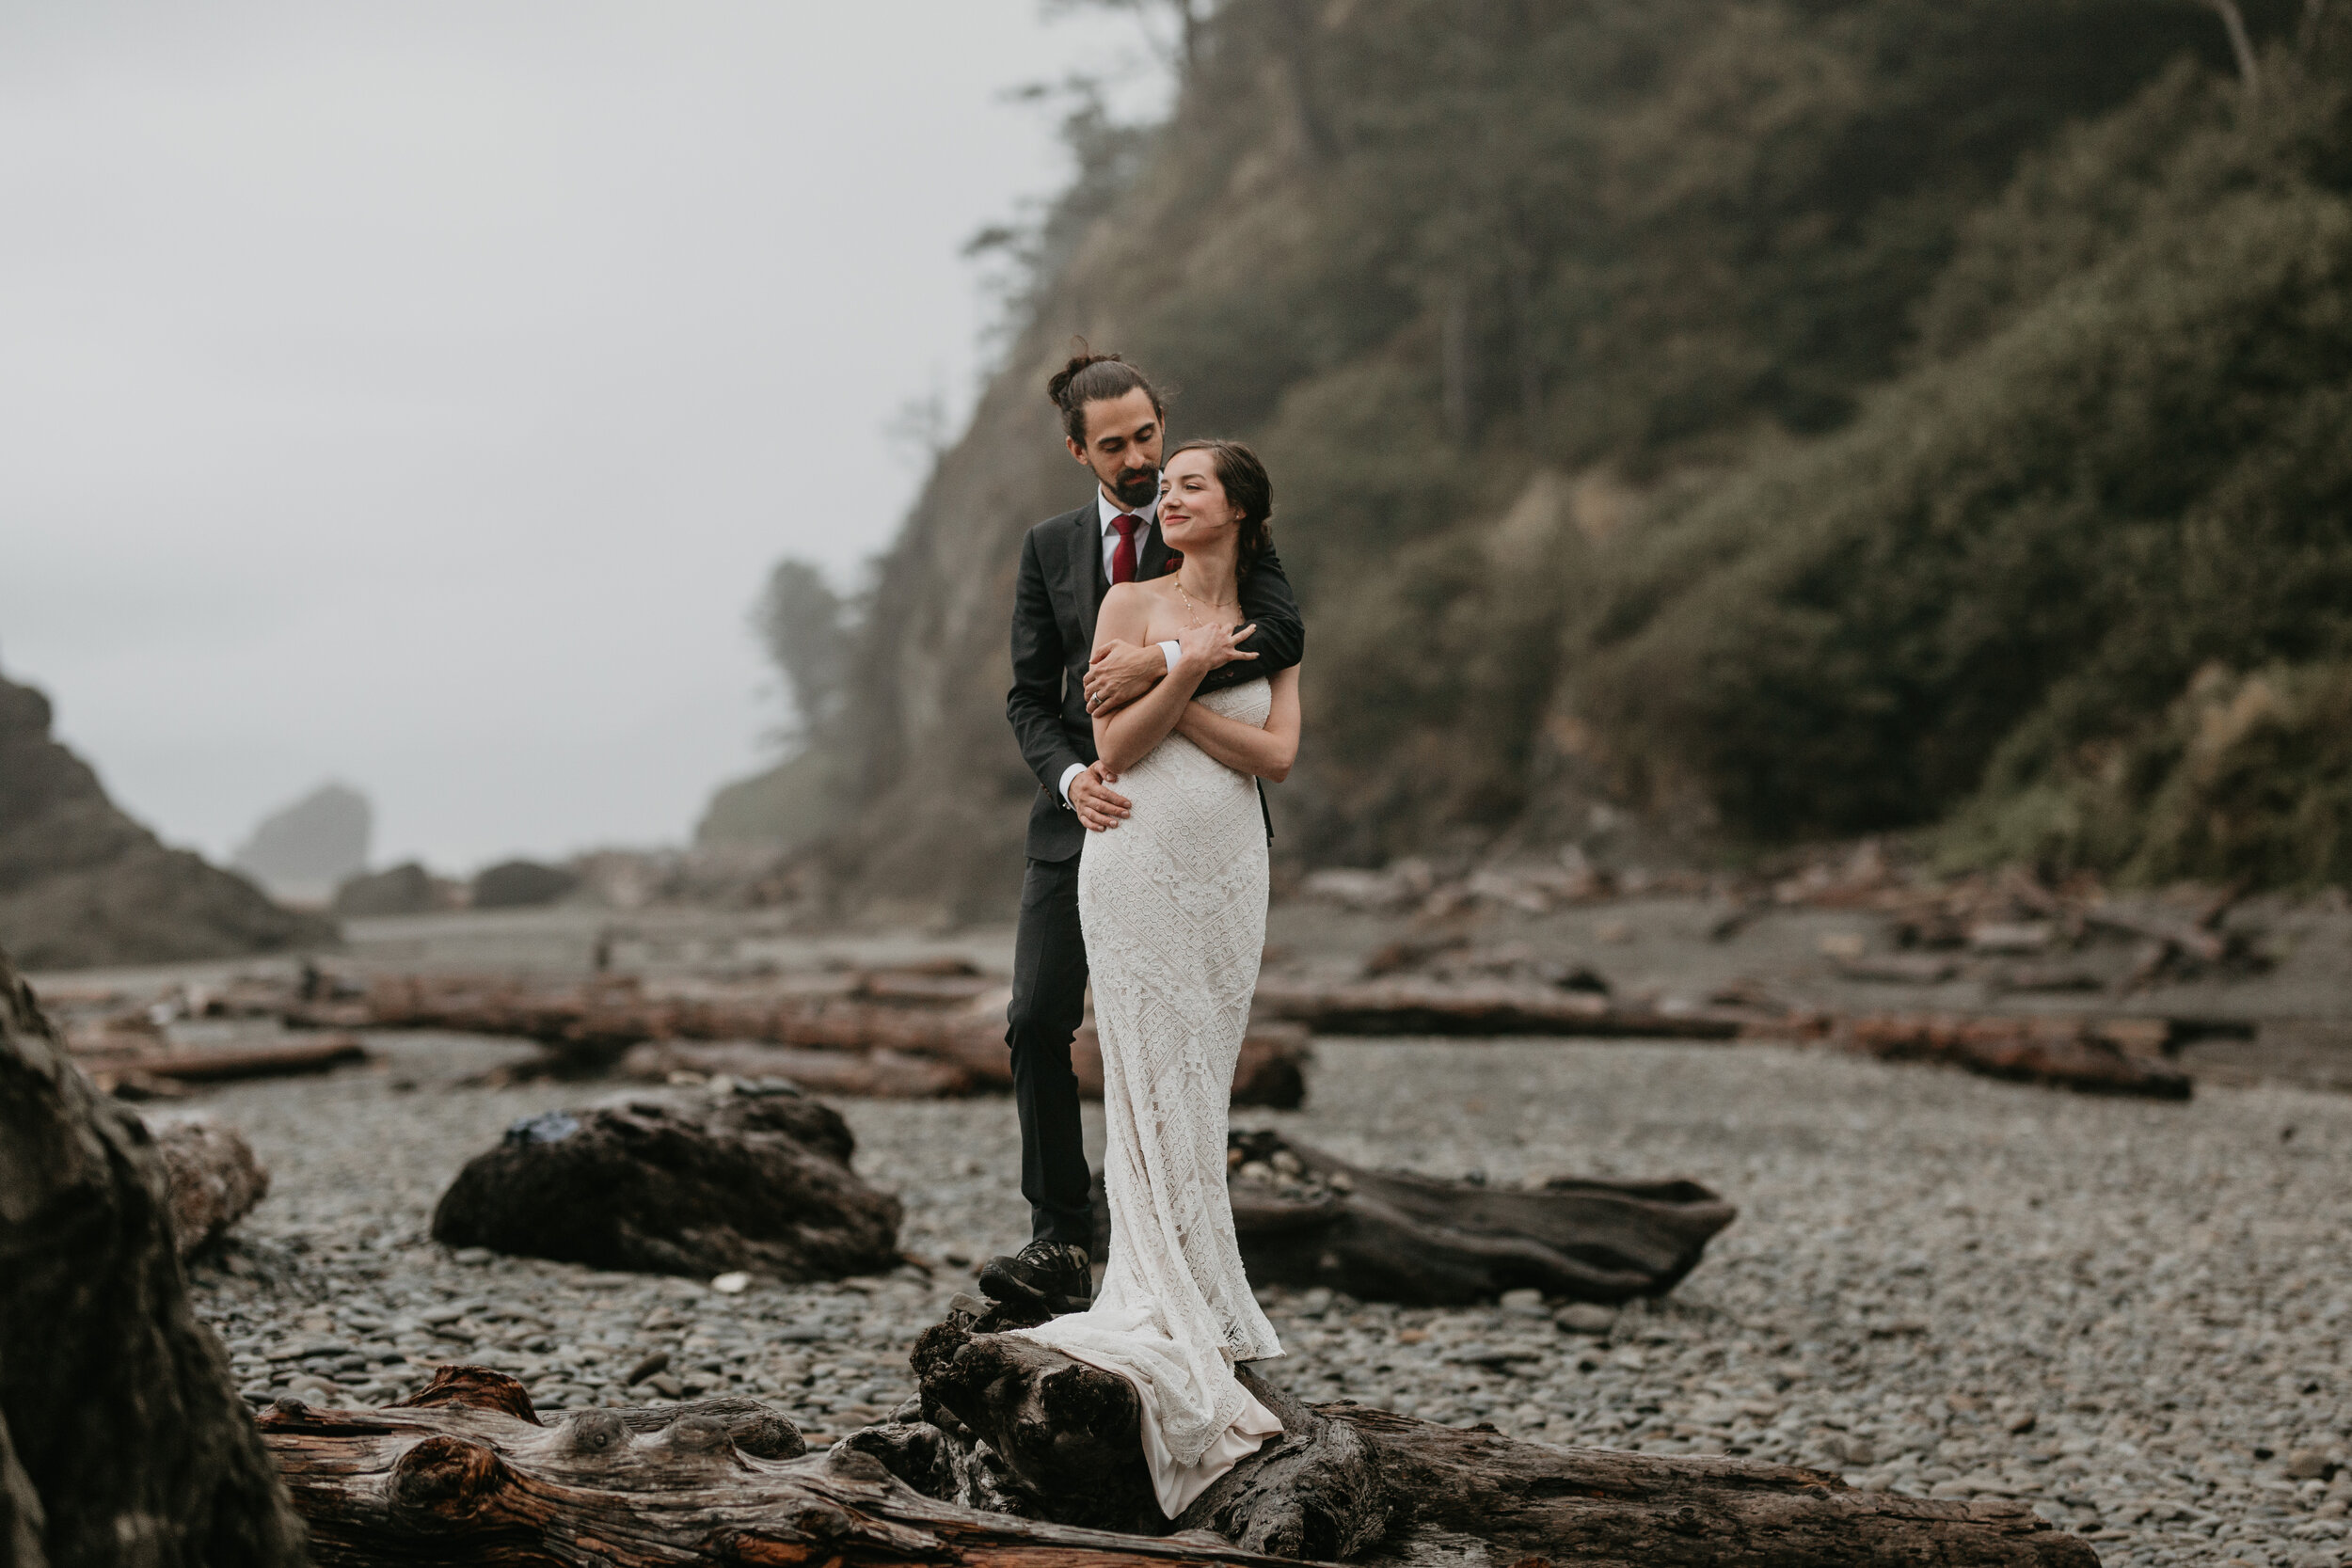 Nicole-Daacke-Photography-Olympic-national-park-elopement-photography-intimiate-elopement-in-olympic-peninsula-washington-state-rainy-day-ruby-beach-hoh-rainforest-elopement-inspiration-rainforest-pnw-elopement-photography-155.jpg